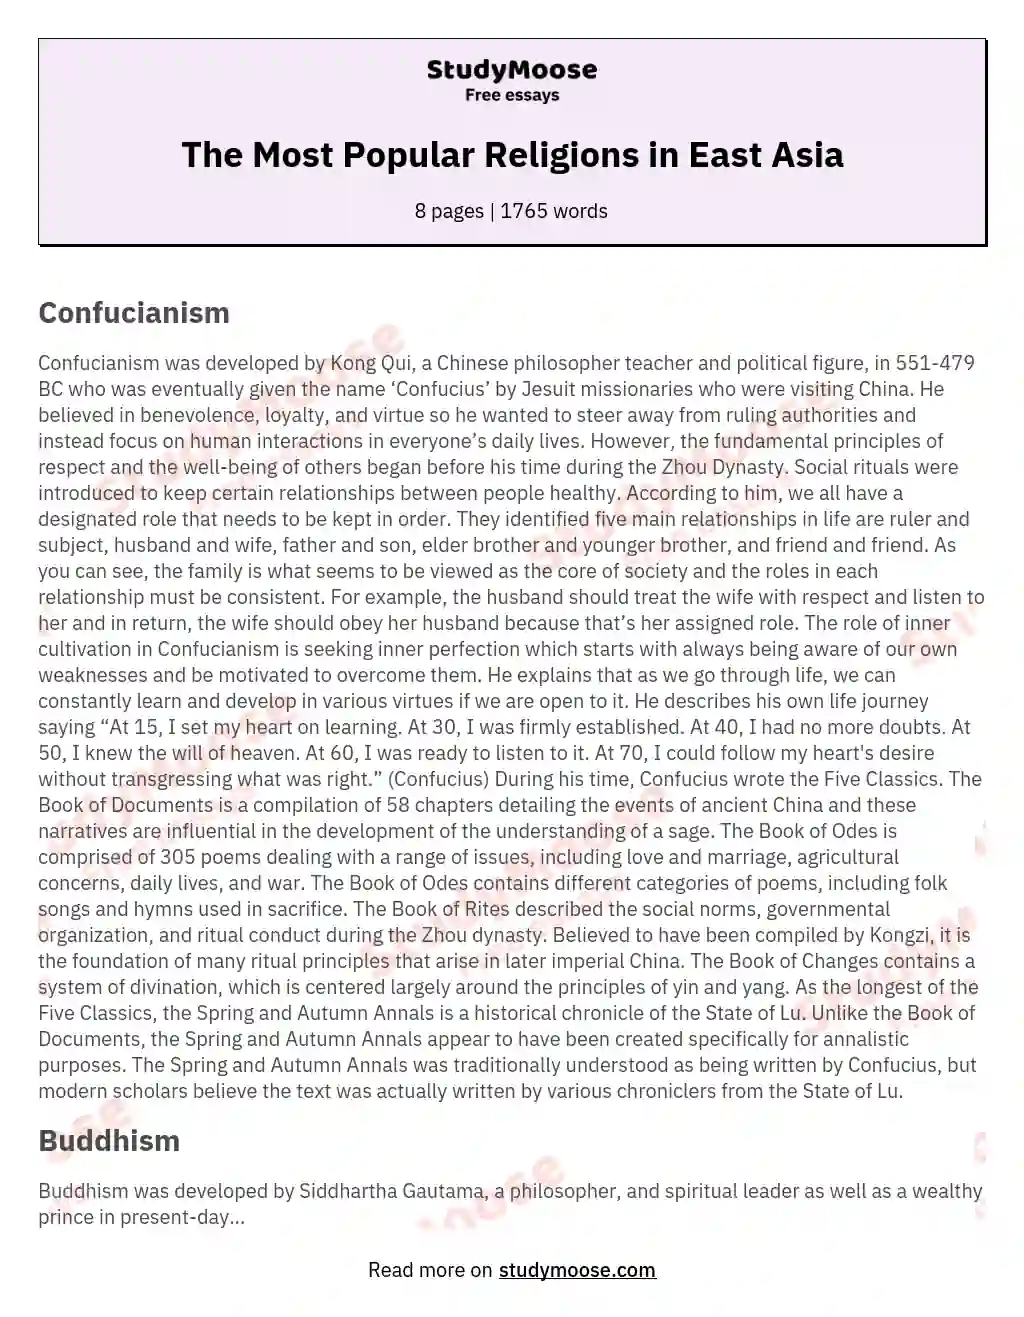 The Most Popular Religions in East Asia essay